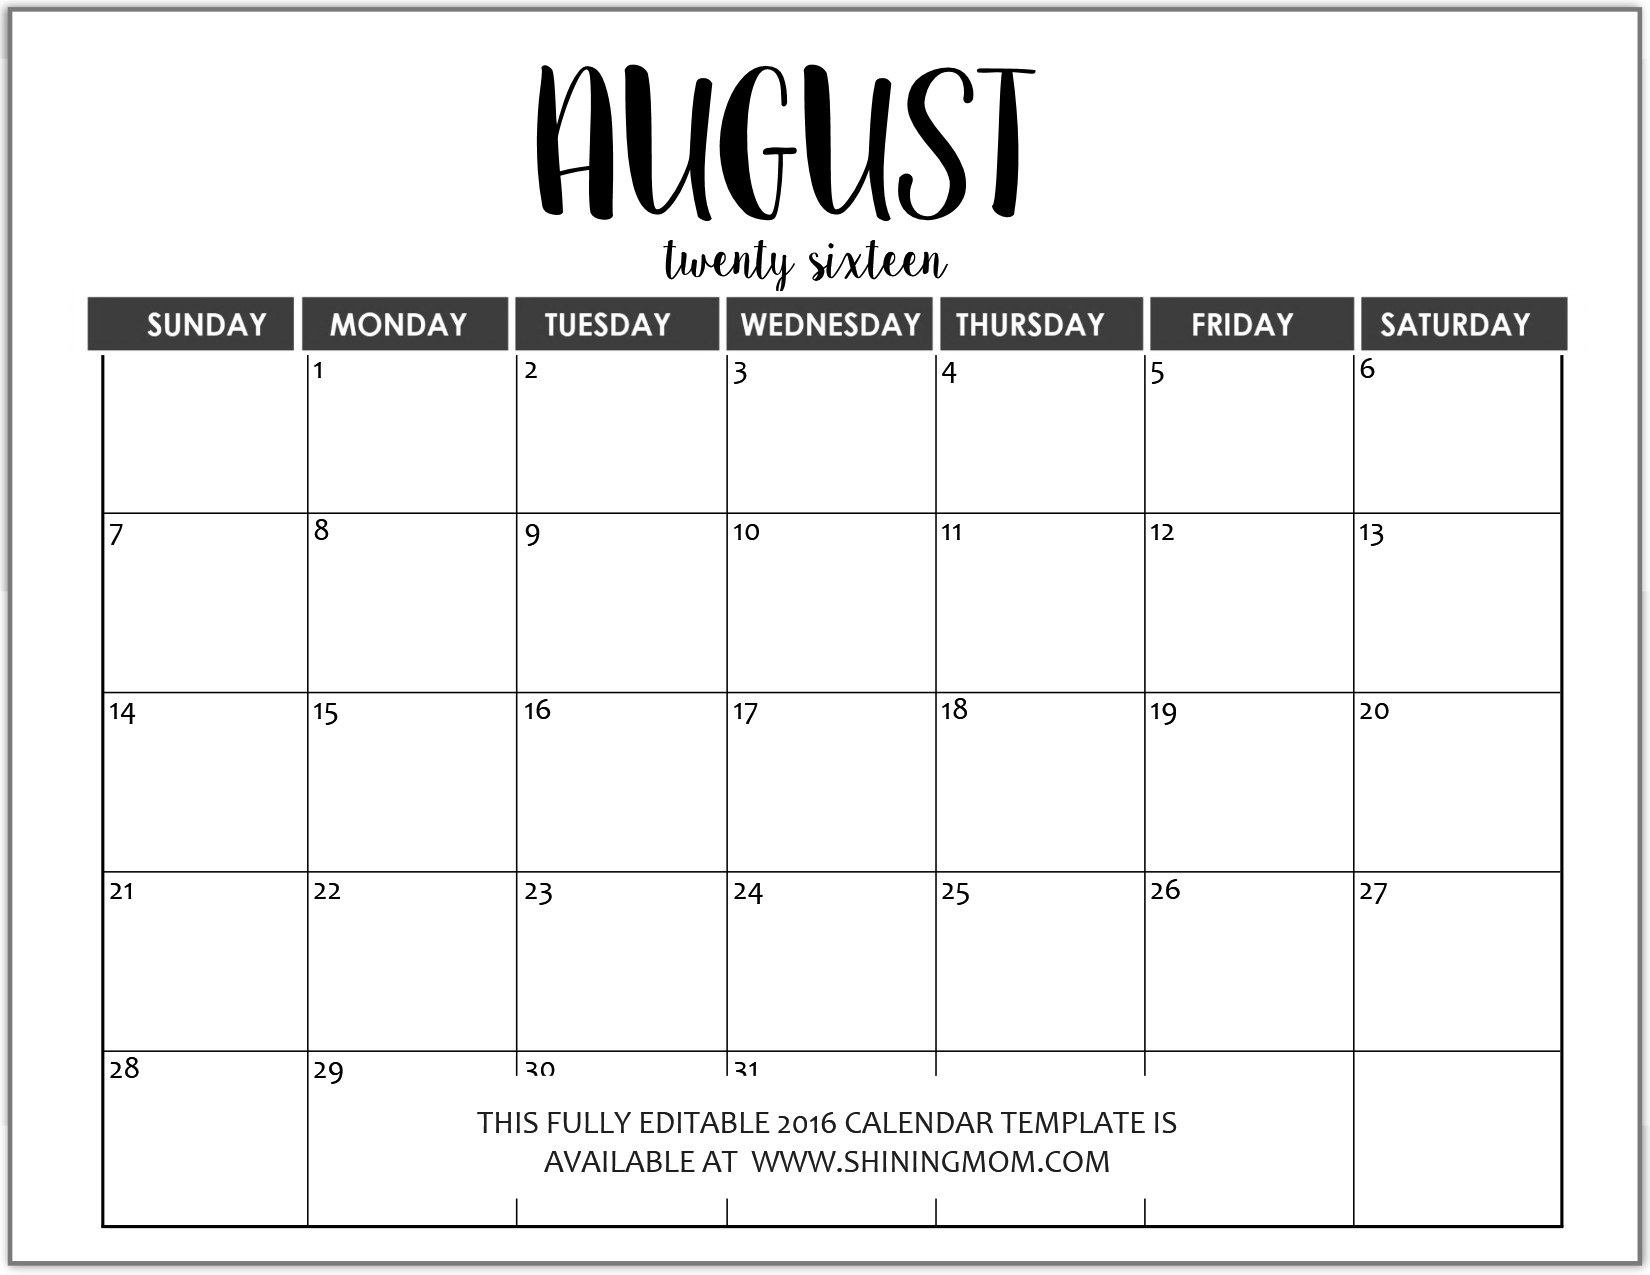 Just In Fully Editable 2016 Calendar Templates in MS Word